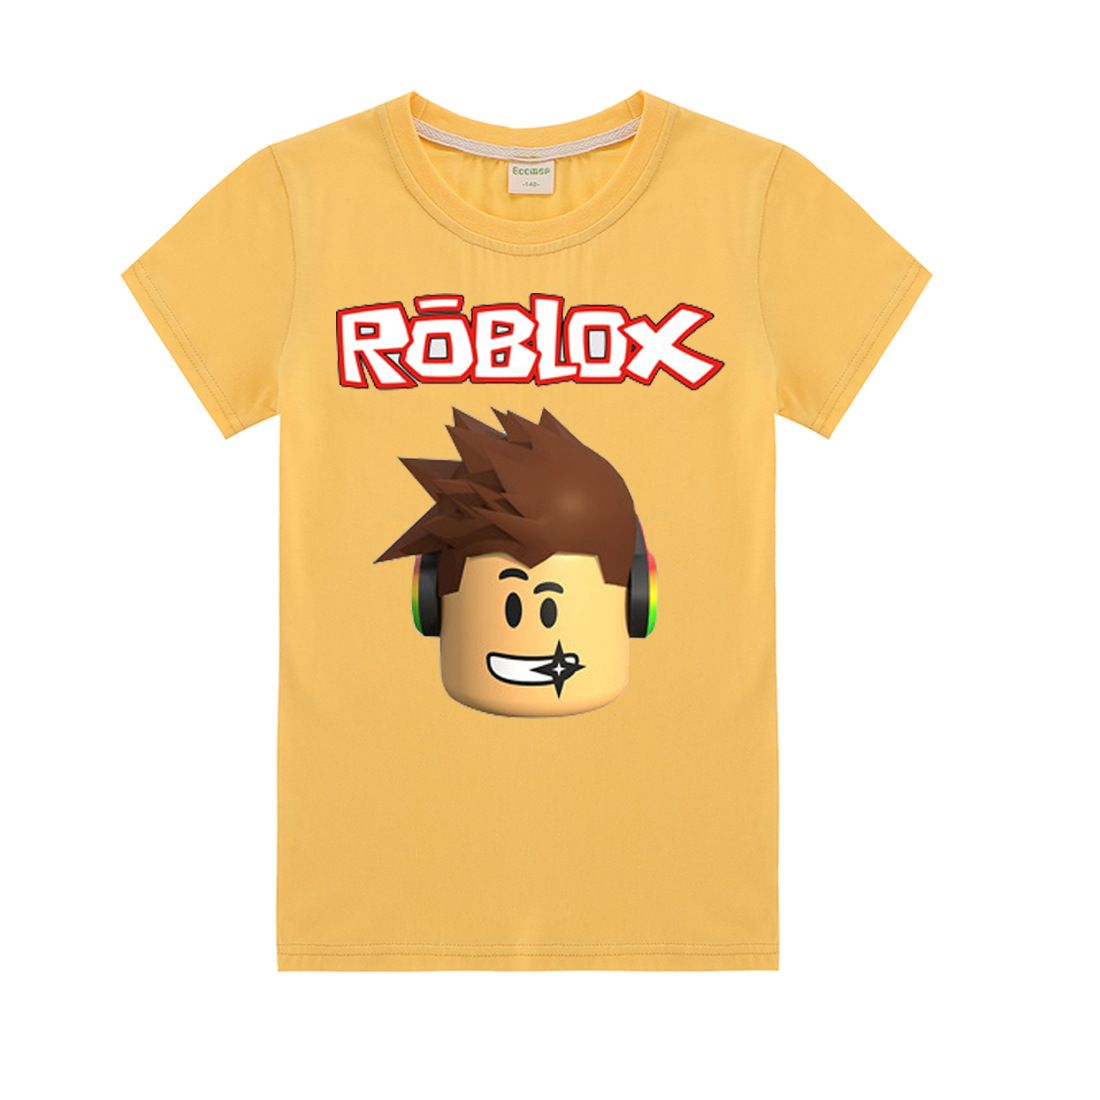 2020 2020 Summer Designer T Shirts For Girls Tops Roblox T Shirt Boys Clothing Cotton Short Sleeve Tshirt Toddler Tops 3 14 Years From Baby0512 13 77 Dhgate Com - roblox girl codes shirts yellow